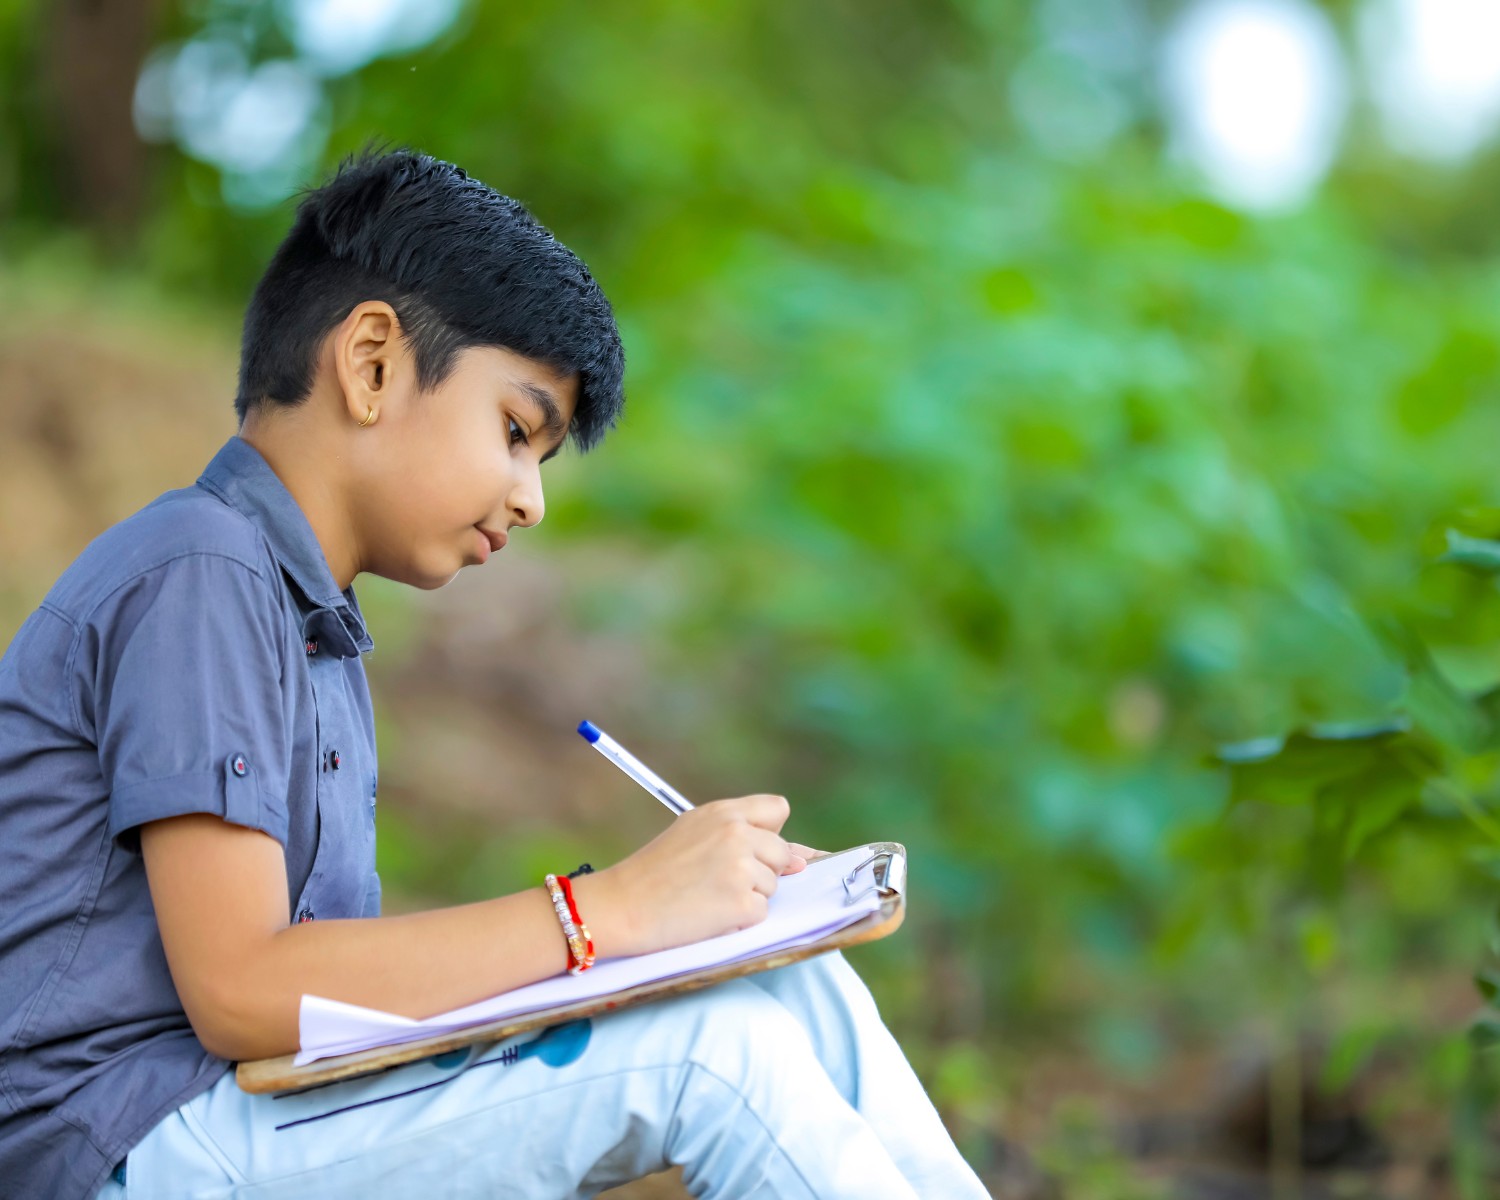 11 Plus Exam Success: How 11 Plus Creative Writing Can Give Your Child an Edge